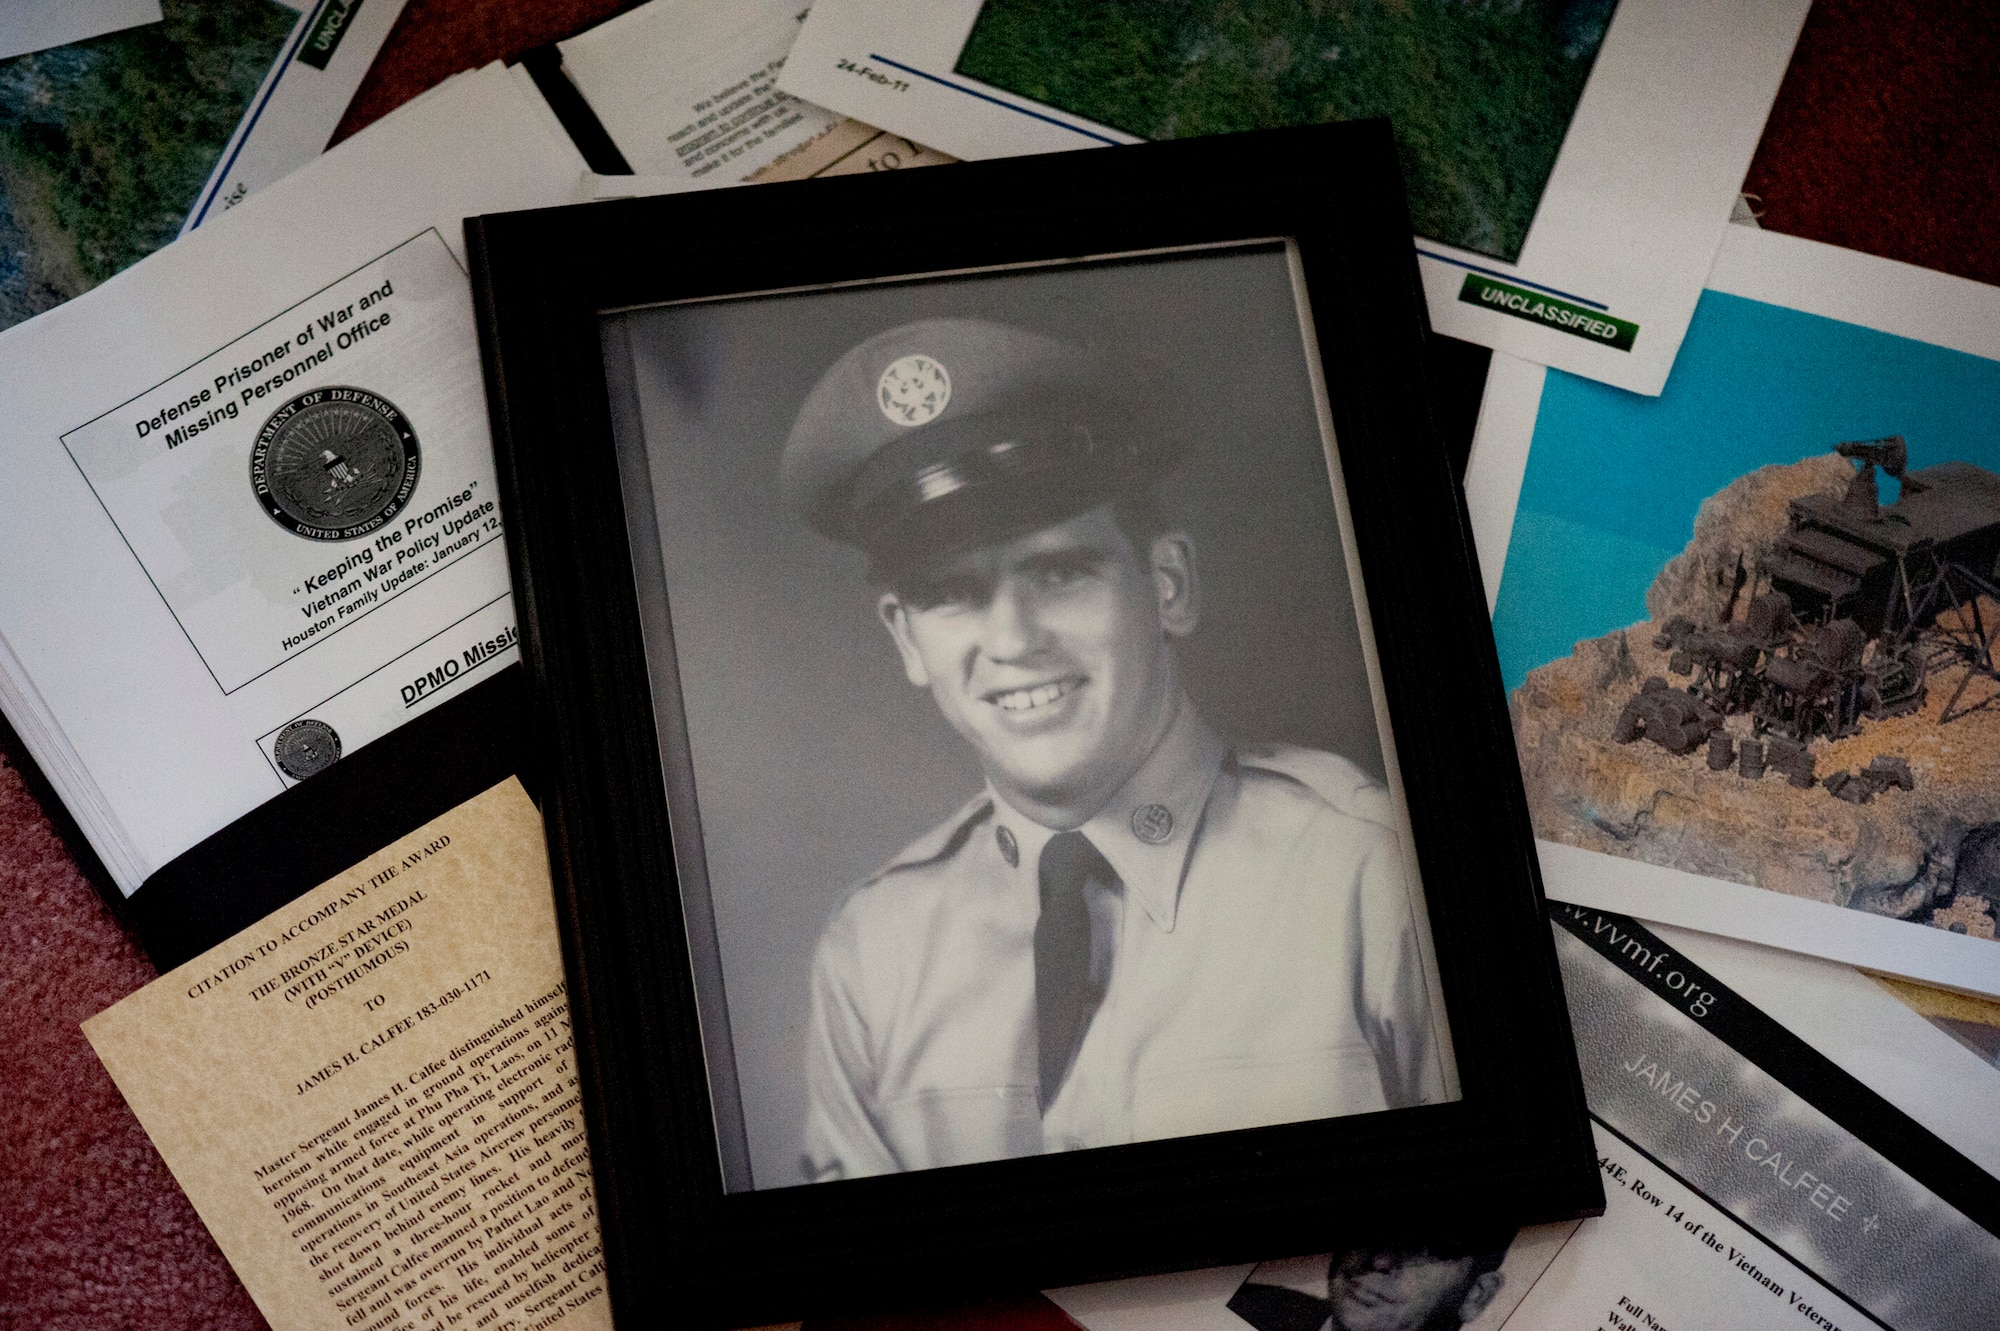 A framed photograph of the late Master Sgt. James Calfee sits among documents compiled by relatives in Houston, Texas, Aug. 22, 2012. Calfee, who was killed in action in Laos in 1968, was recently awarded the Silver Star Medal. (U.S. Air Force photo/Val Gempis)